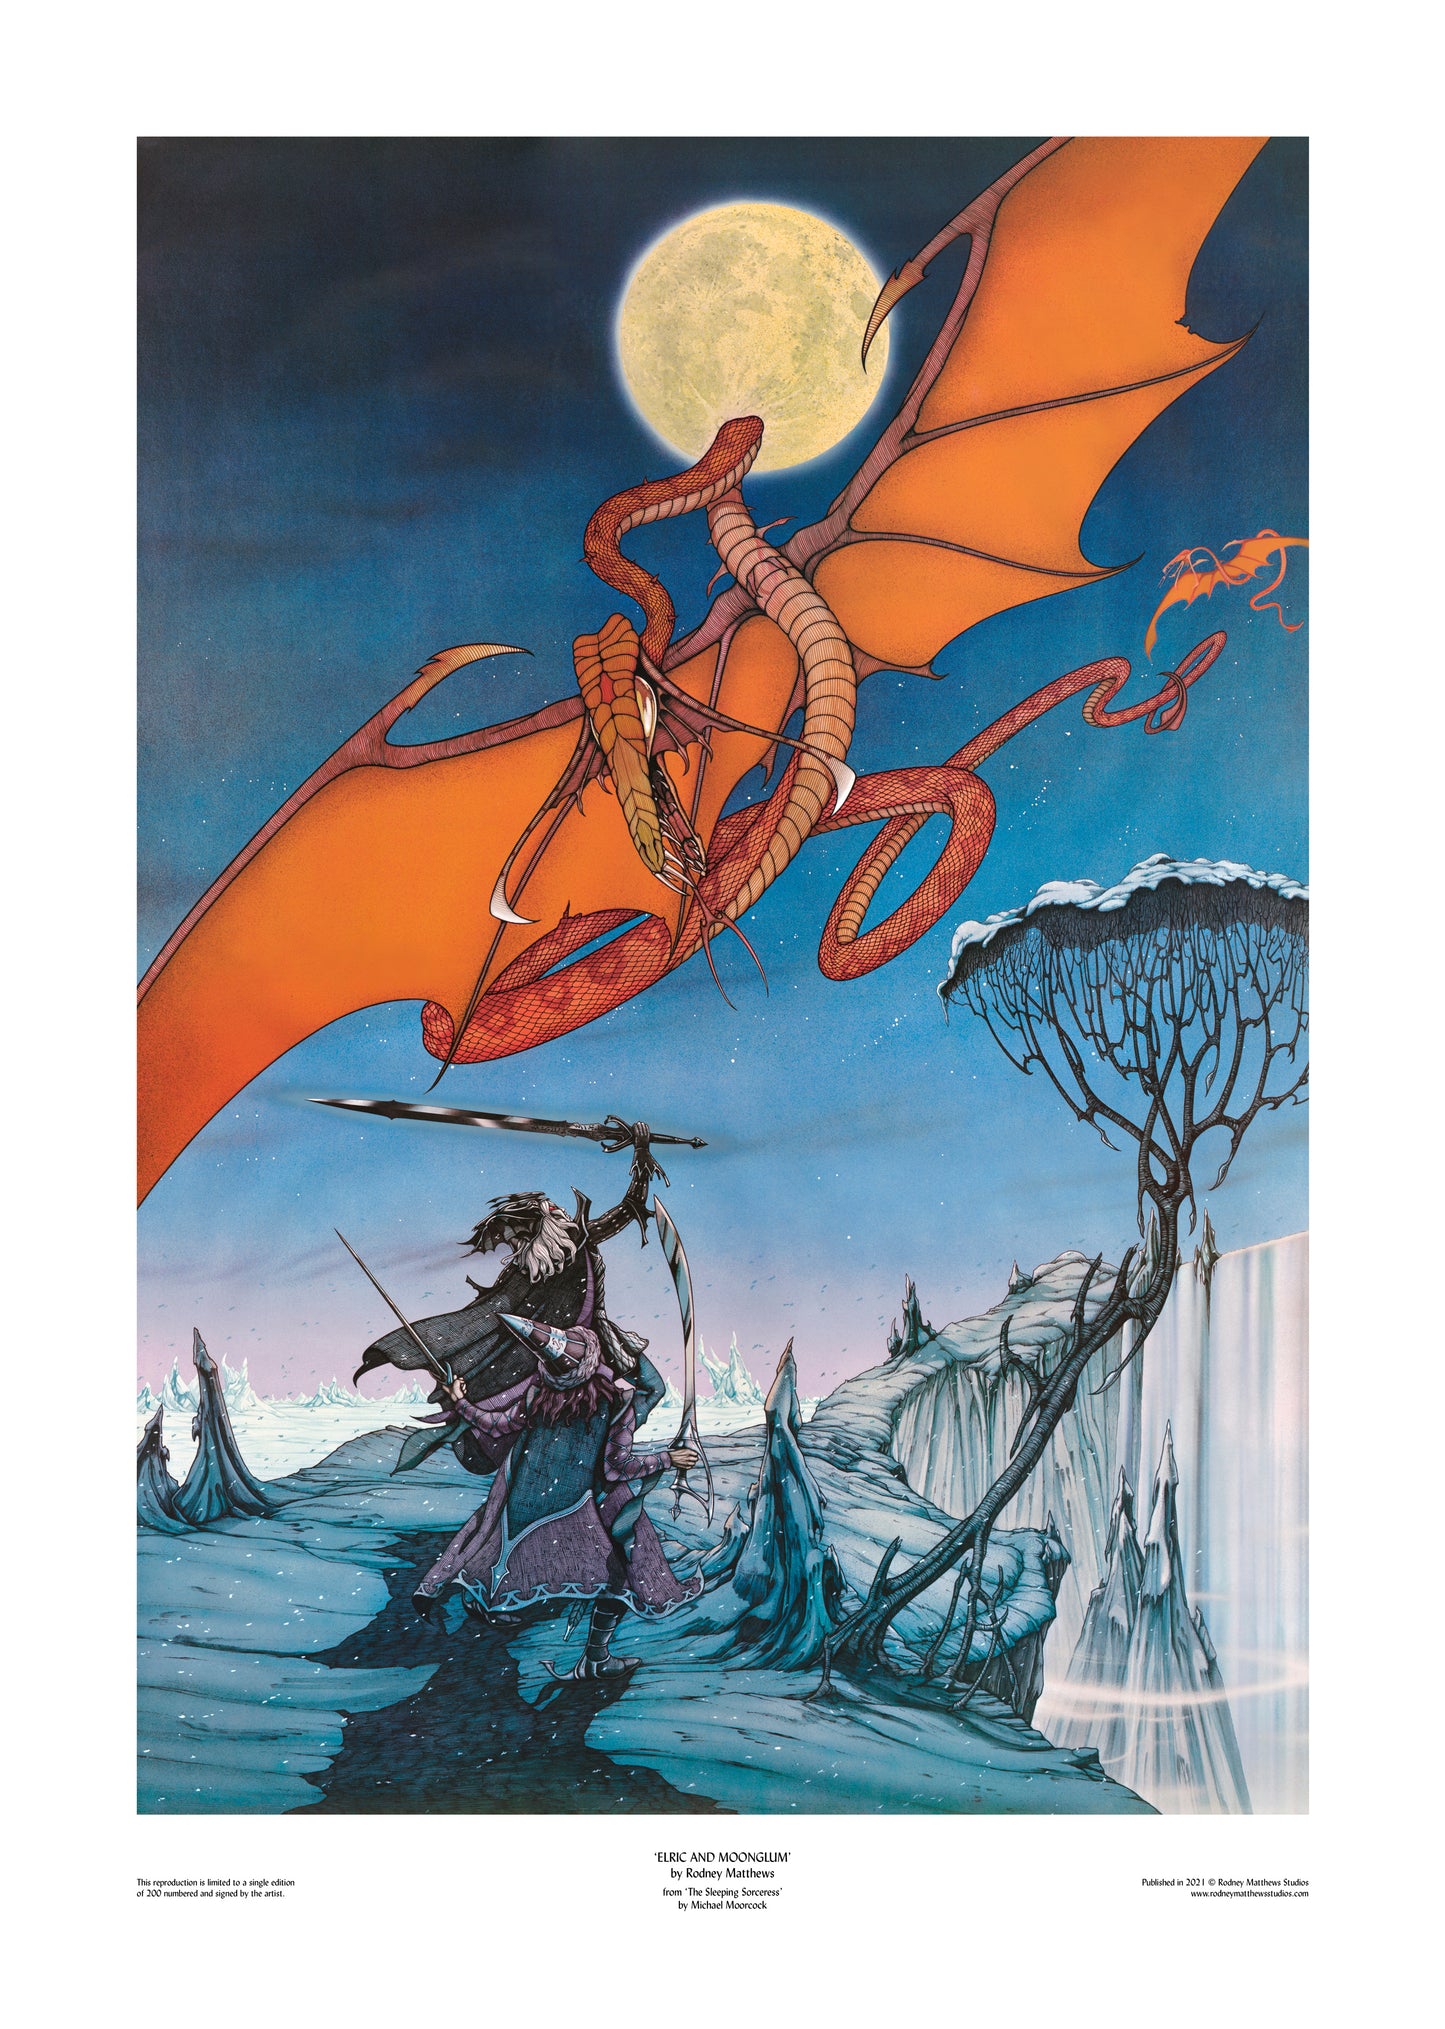 Elric and Moonglum limited edition giclèe print by Rodney Matthews